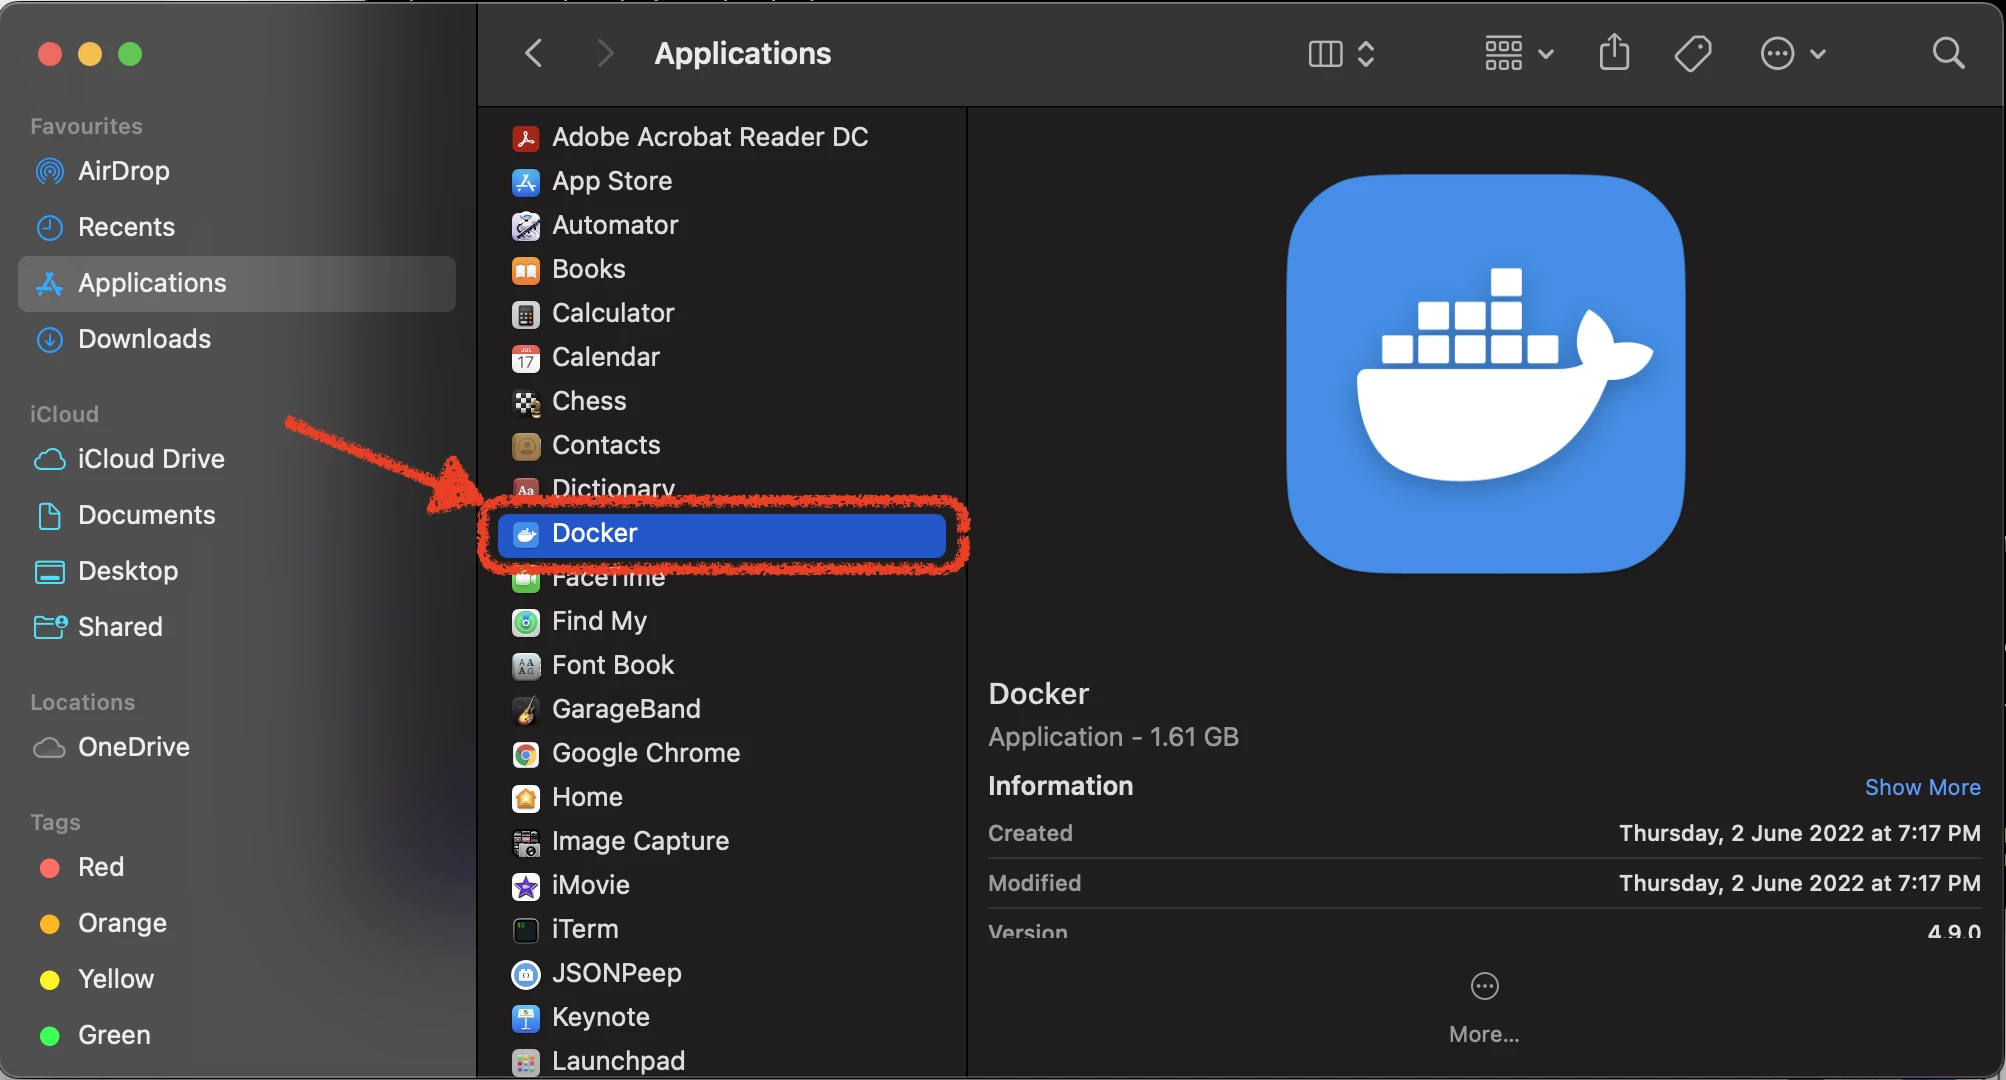 Docker in the Finder list of Applications